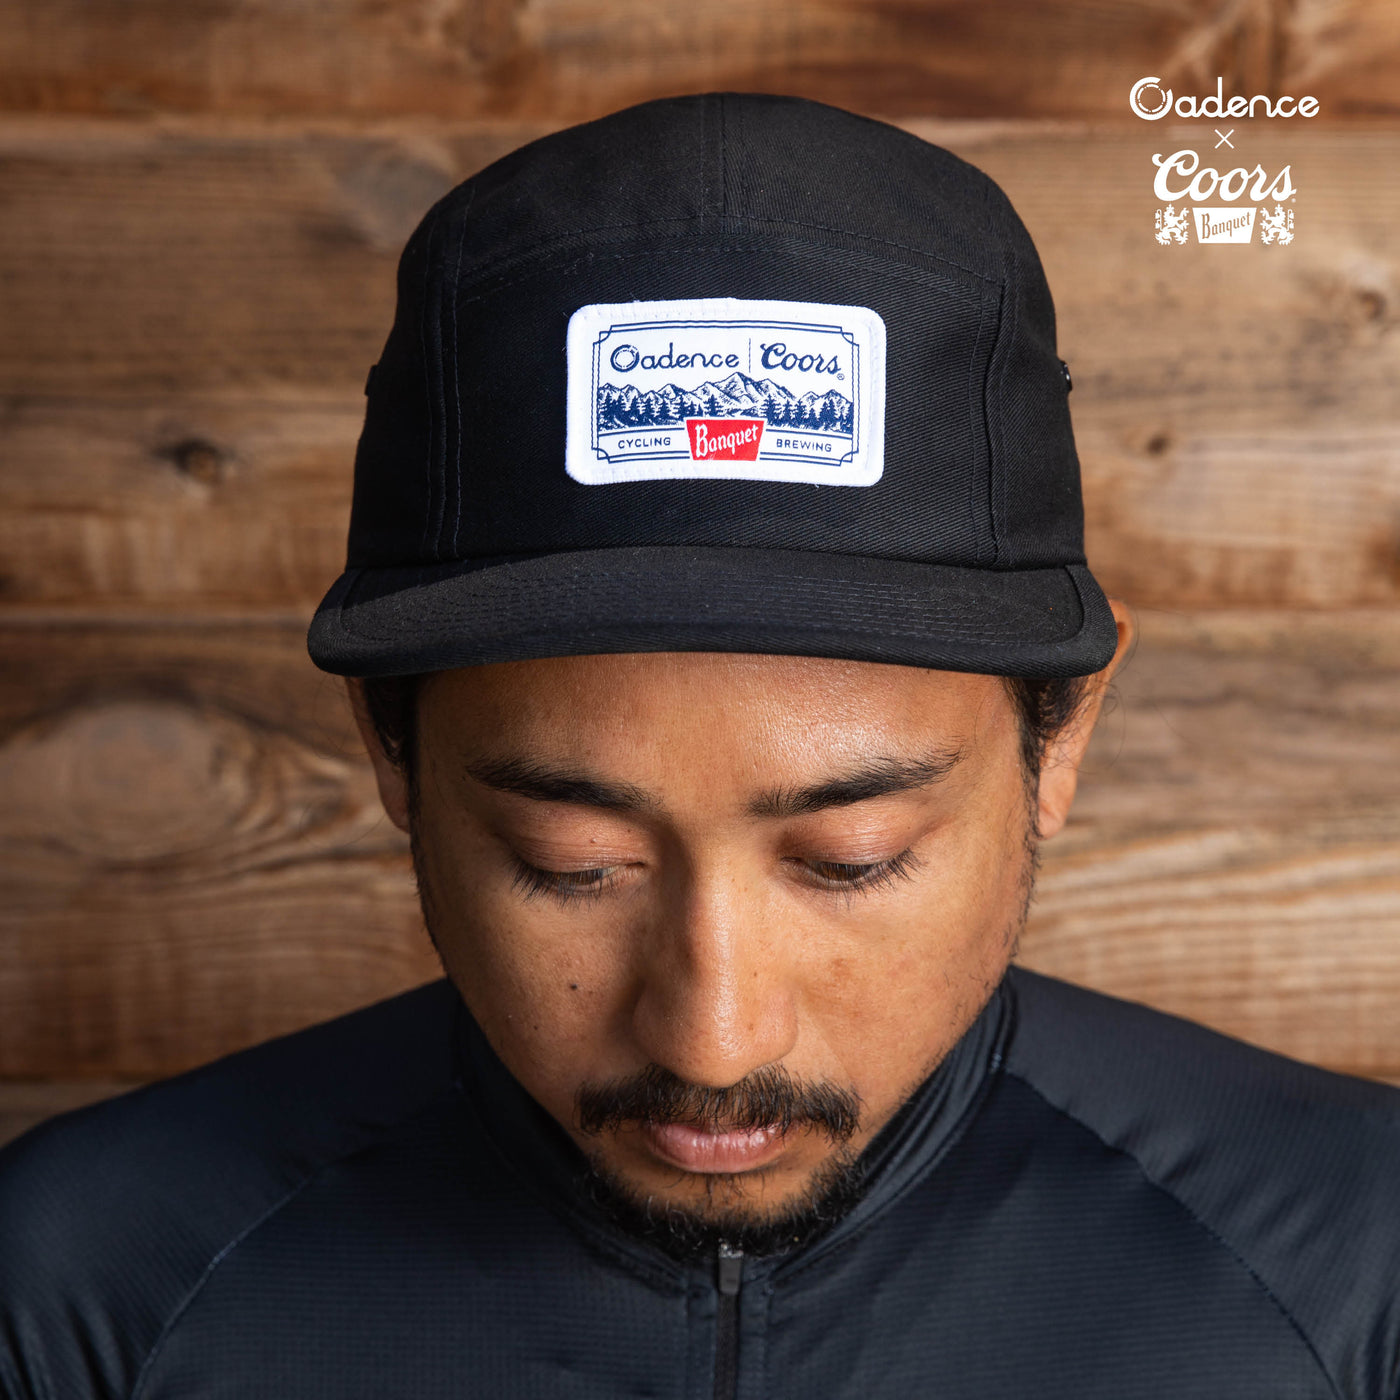 THIS ITEM IS READY TO SHIP The Low Pro 5-Panel Cap • 100% cotton • Adjustable plastic snap closure at back • Cadence reflective detailing for functionality at back • Style for miles  THIS LICENSED PRODUCT IS INTENDED FOR ADULTS OF LEGAL DRINKING AGE  @Coors Brewing Company. All Rights Reserved |Produced Under License by Cadence Collection